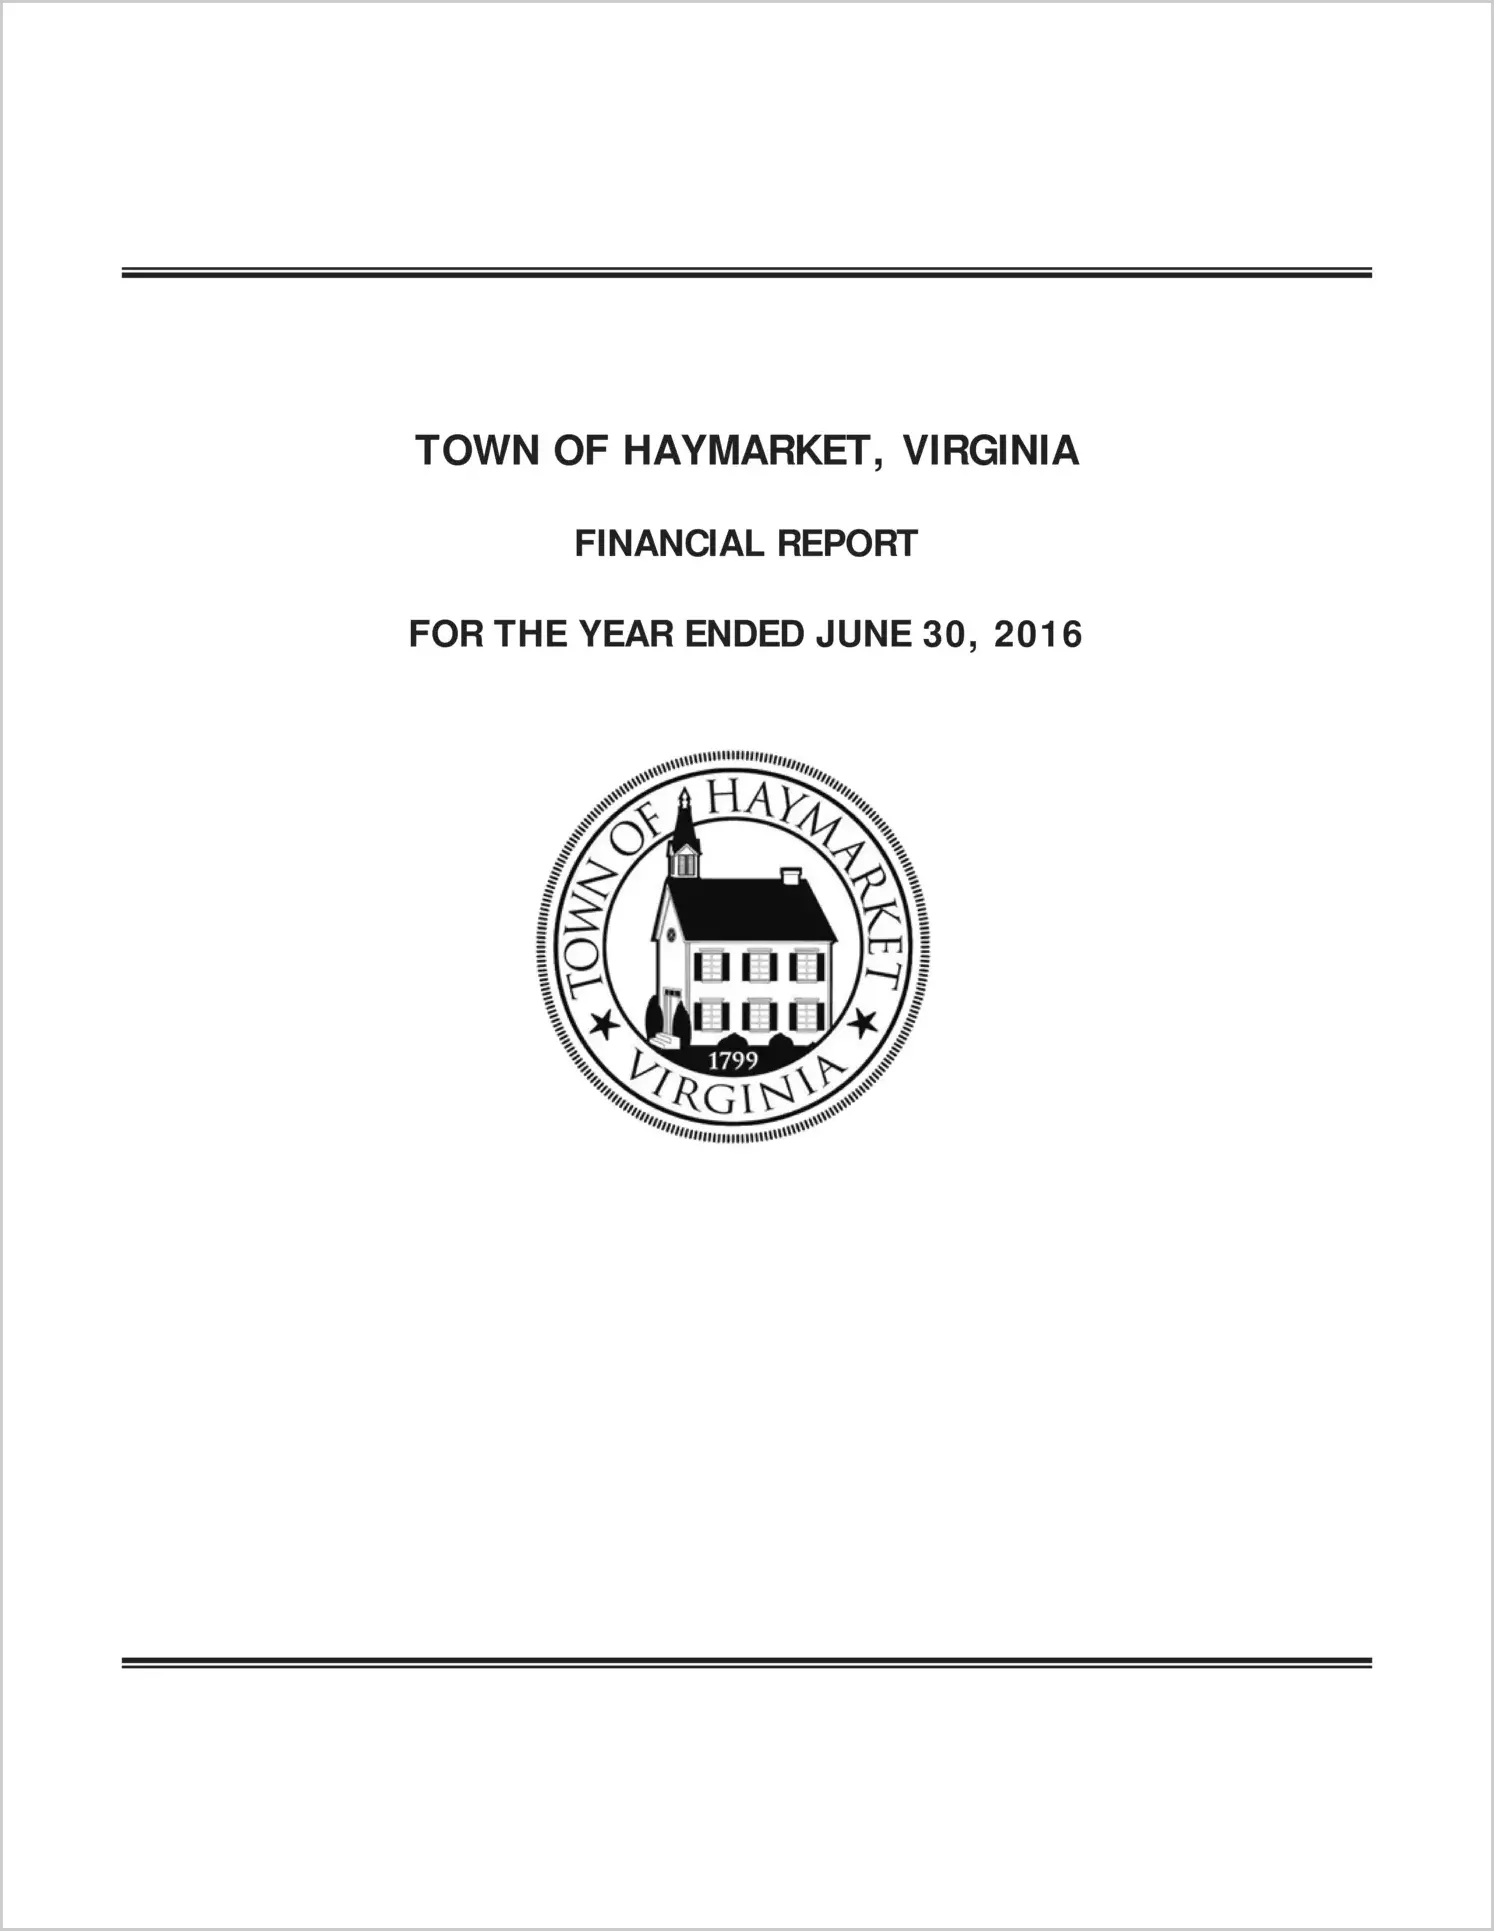 2016 Annual Financial Report for Town of Haymarket